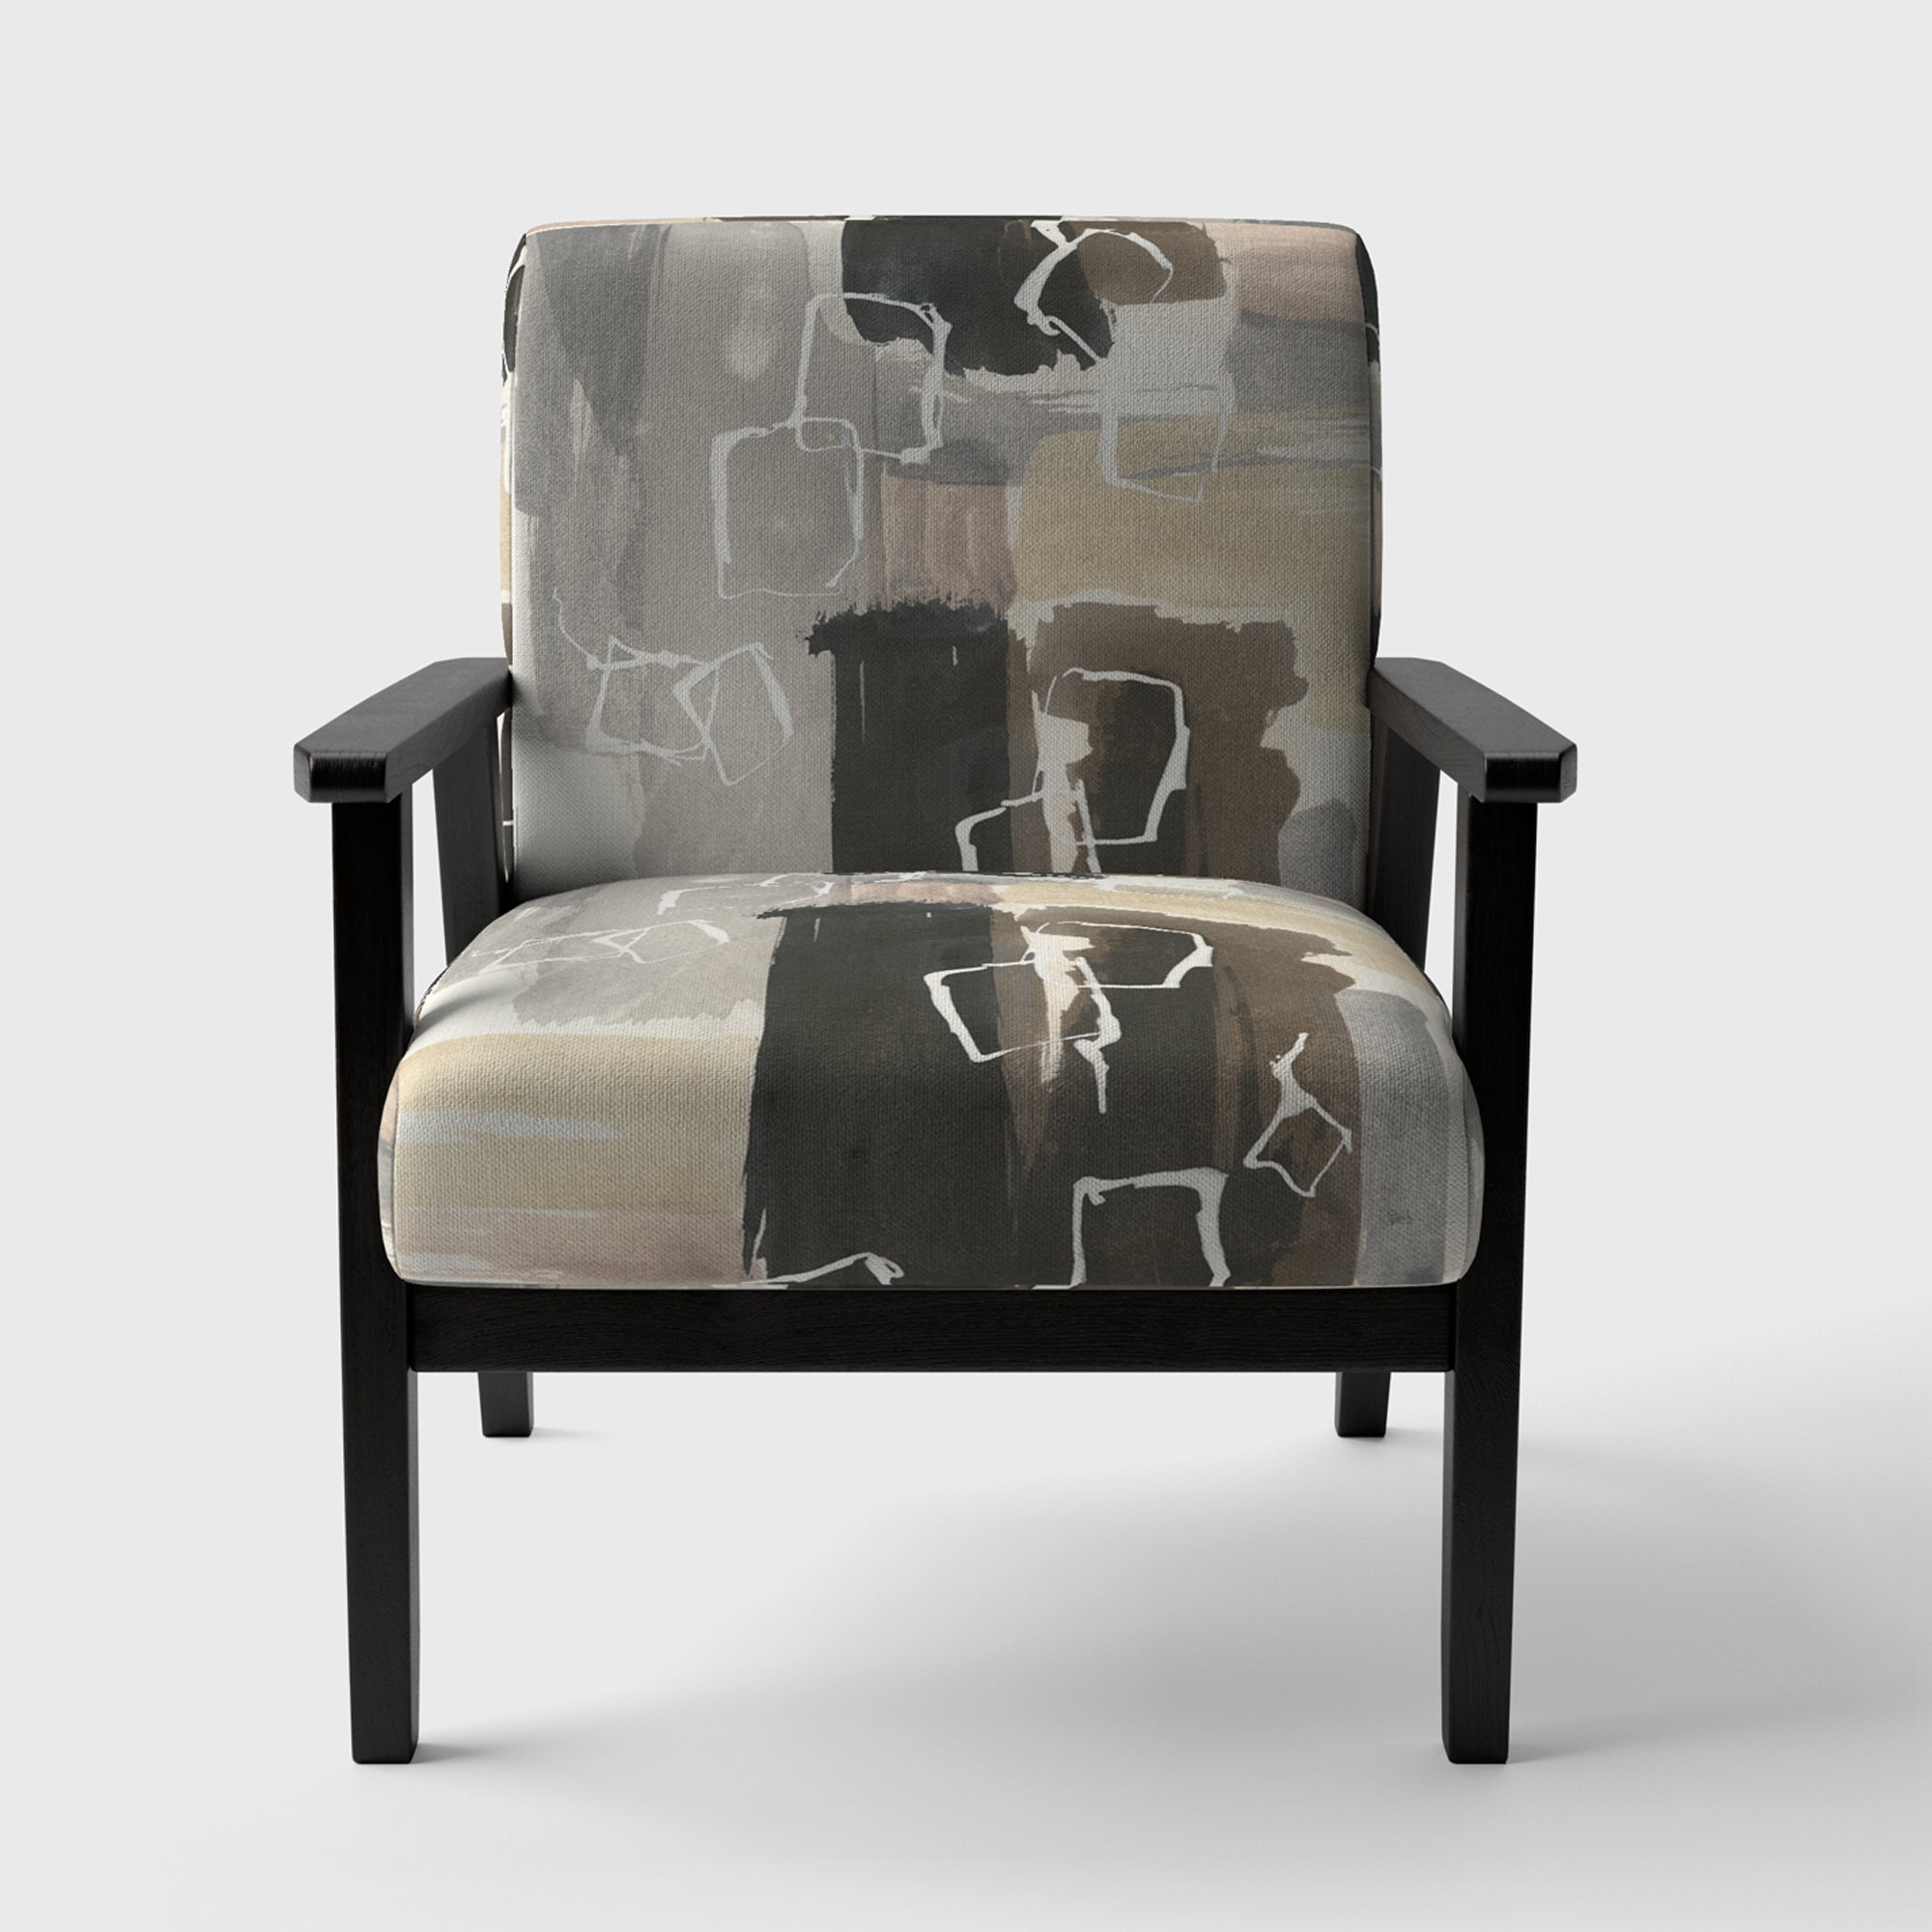 Glam Dancing shape I Modern Accent Chair